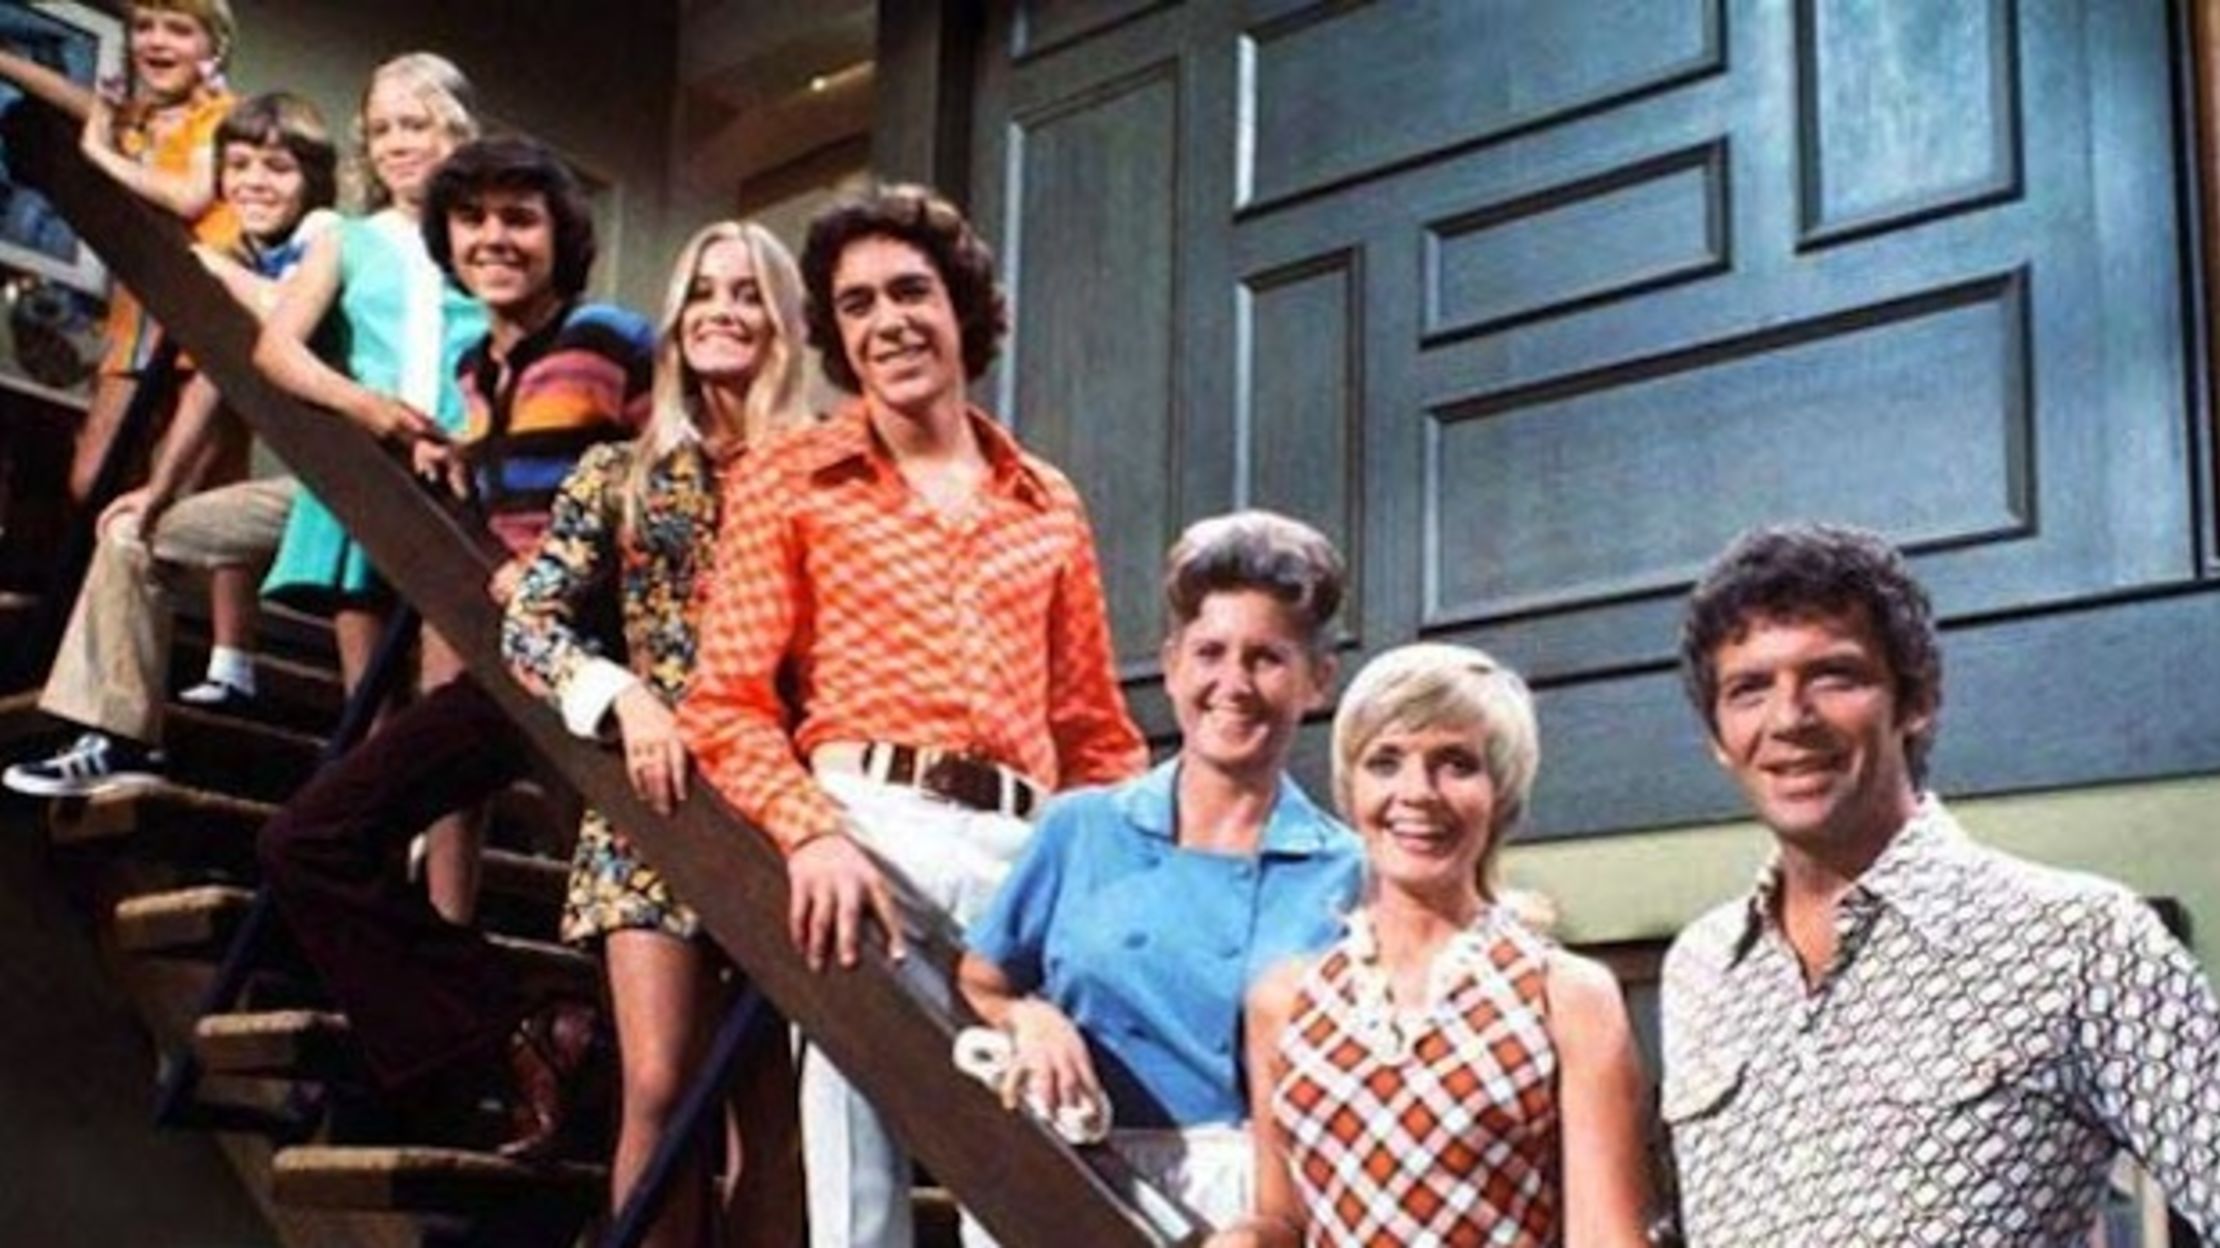 Things You Might Not Know About 'The Brady Bunch'